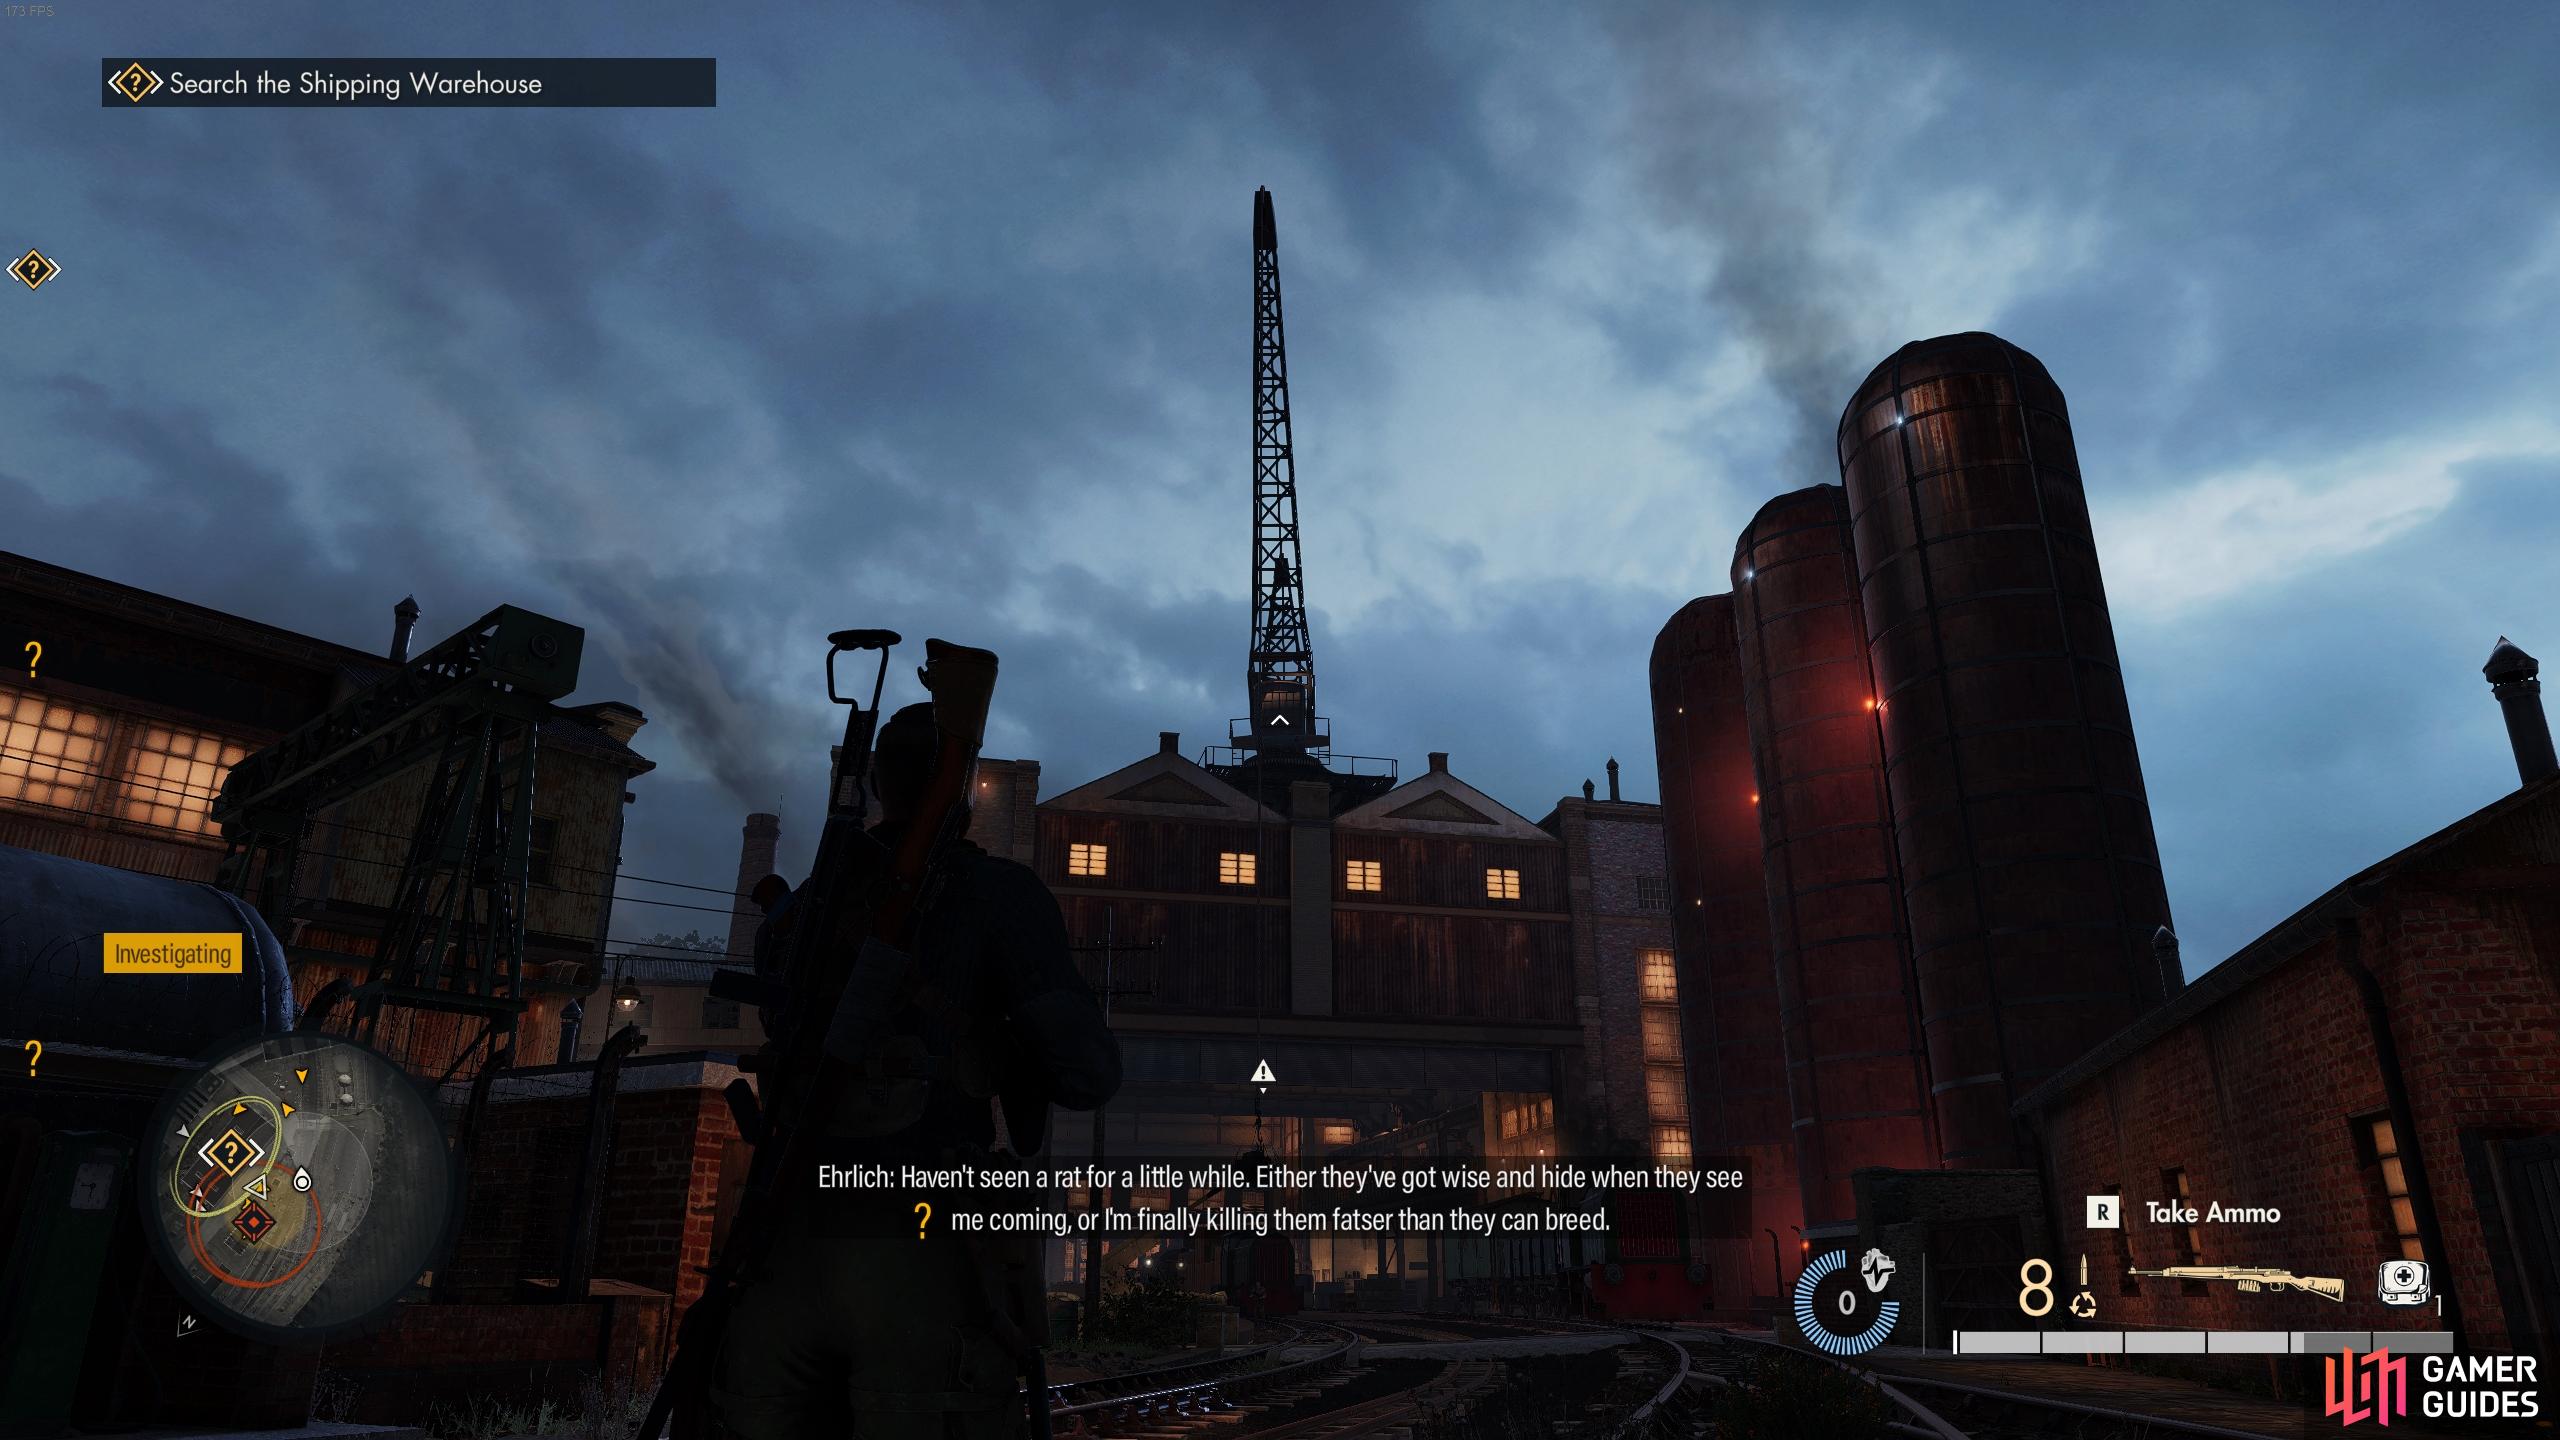 The crane is located just above the warehouse building, and you can see the operator when you scope in.